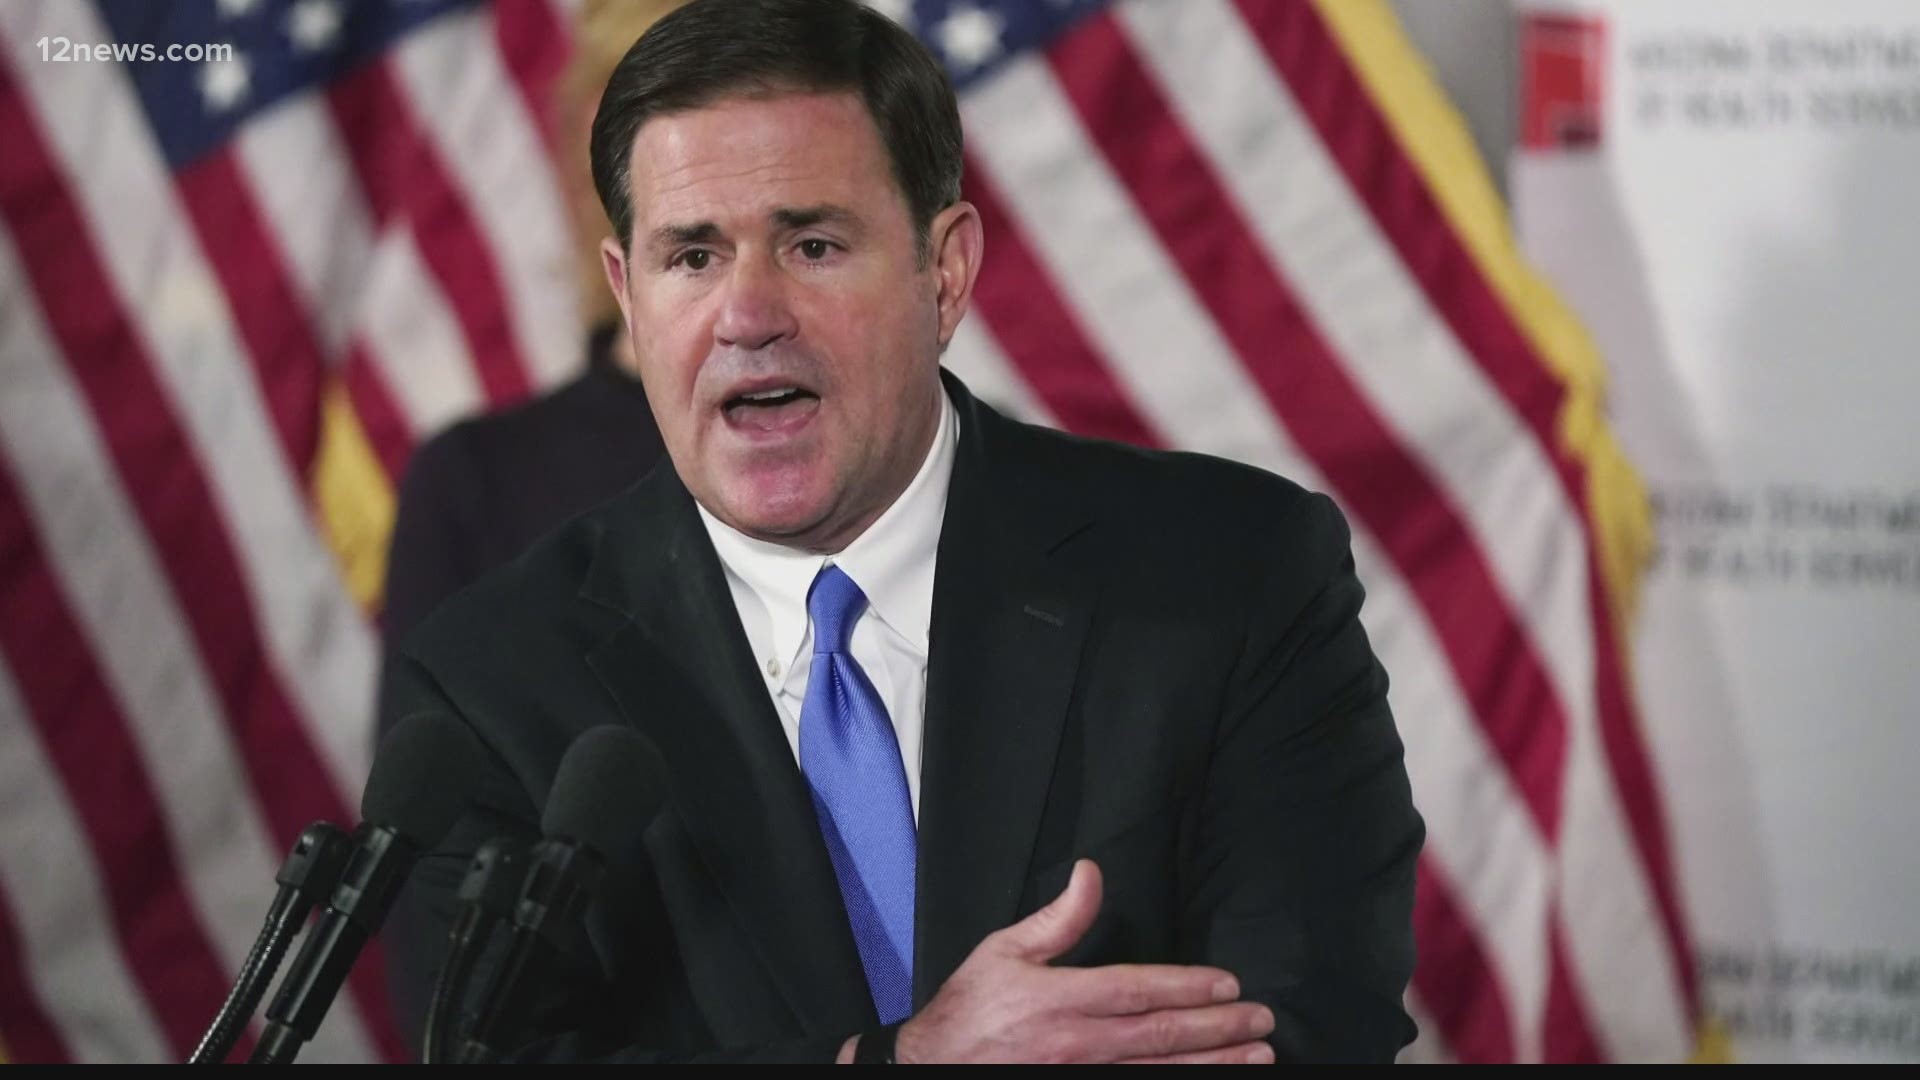 Gov. Ducey doesn't want schools to quarantine unvaccinated students who may have been exposed to COVID. The state superintendent of schools and districts disaree.